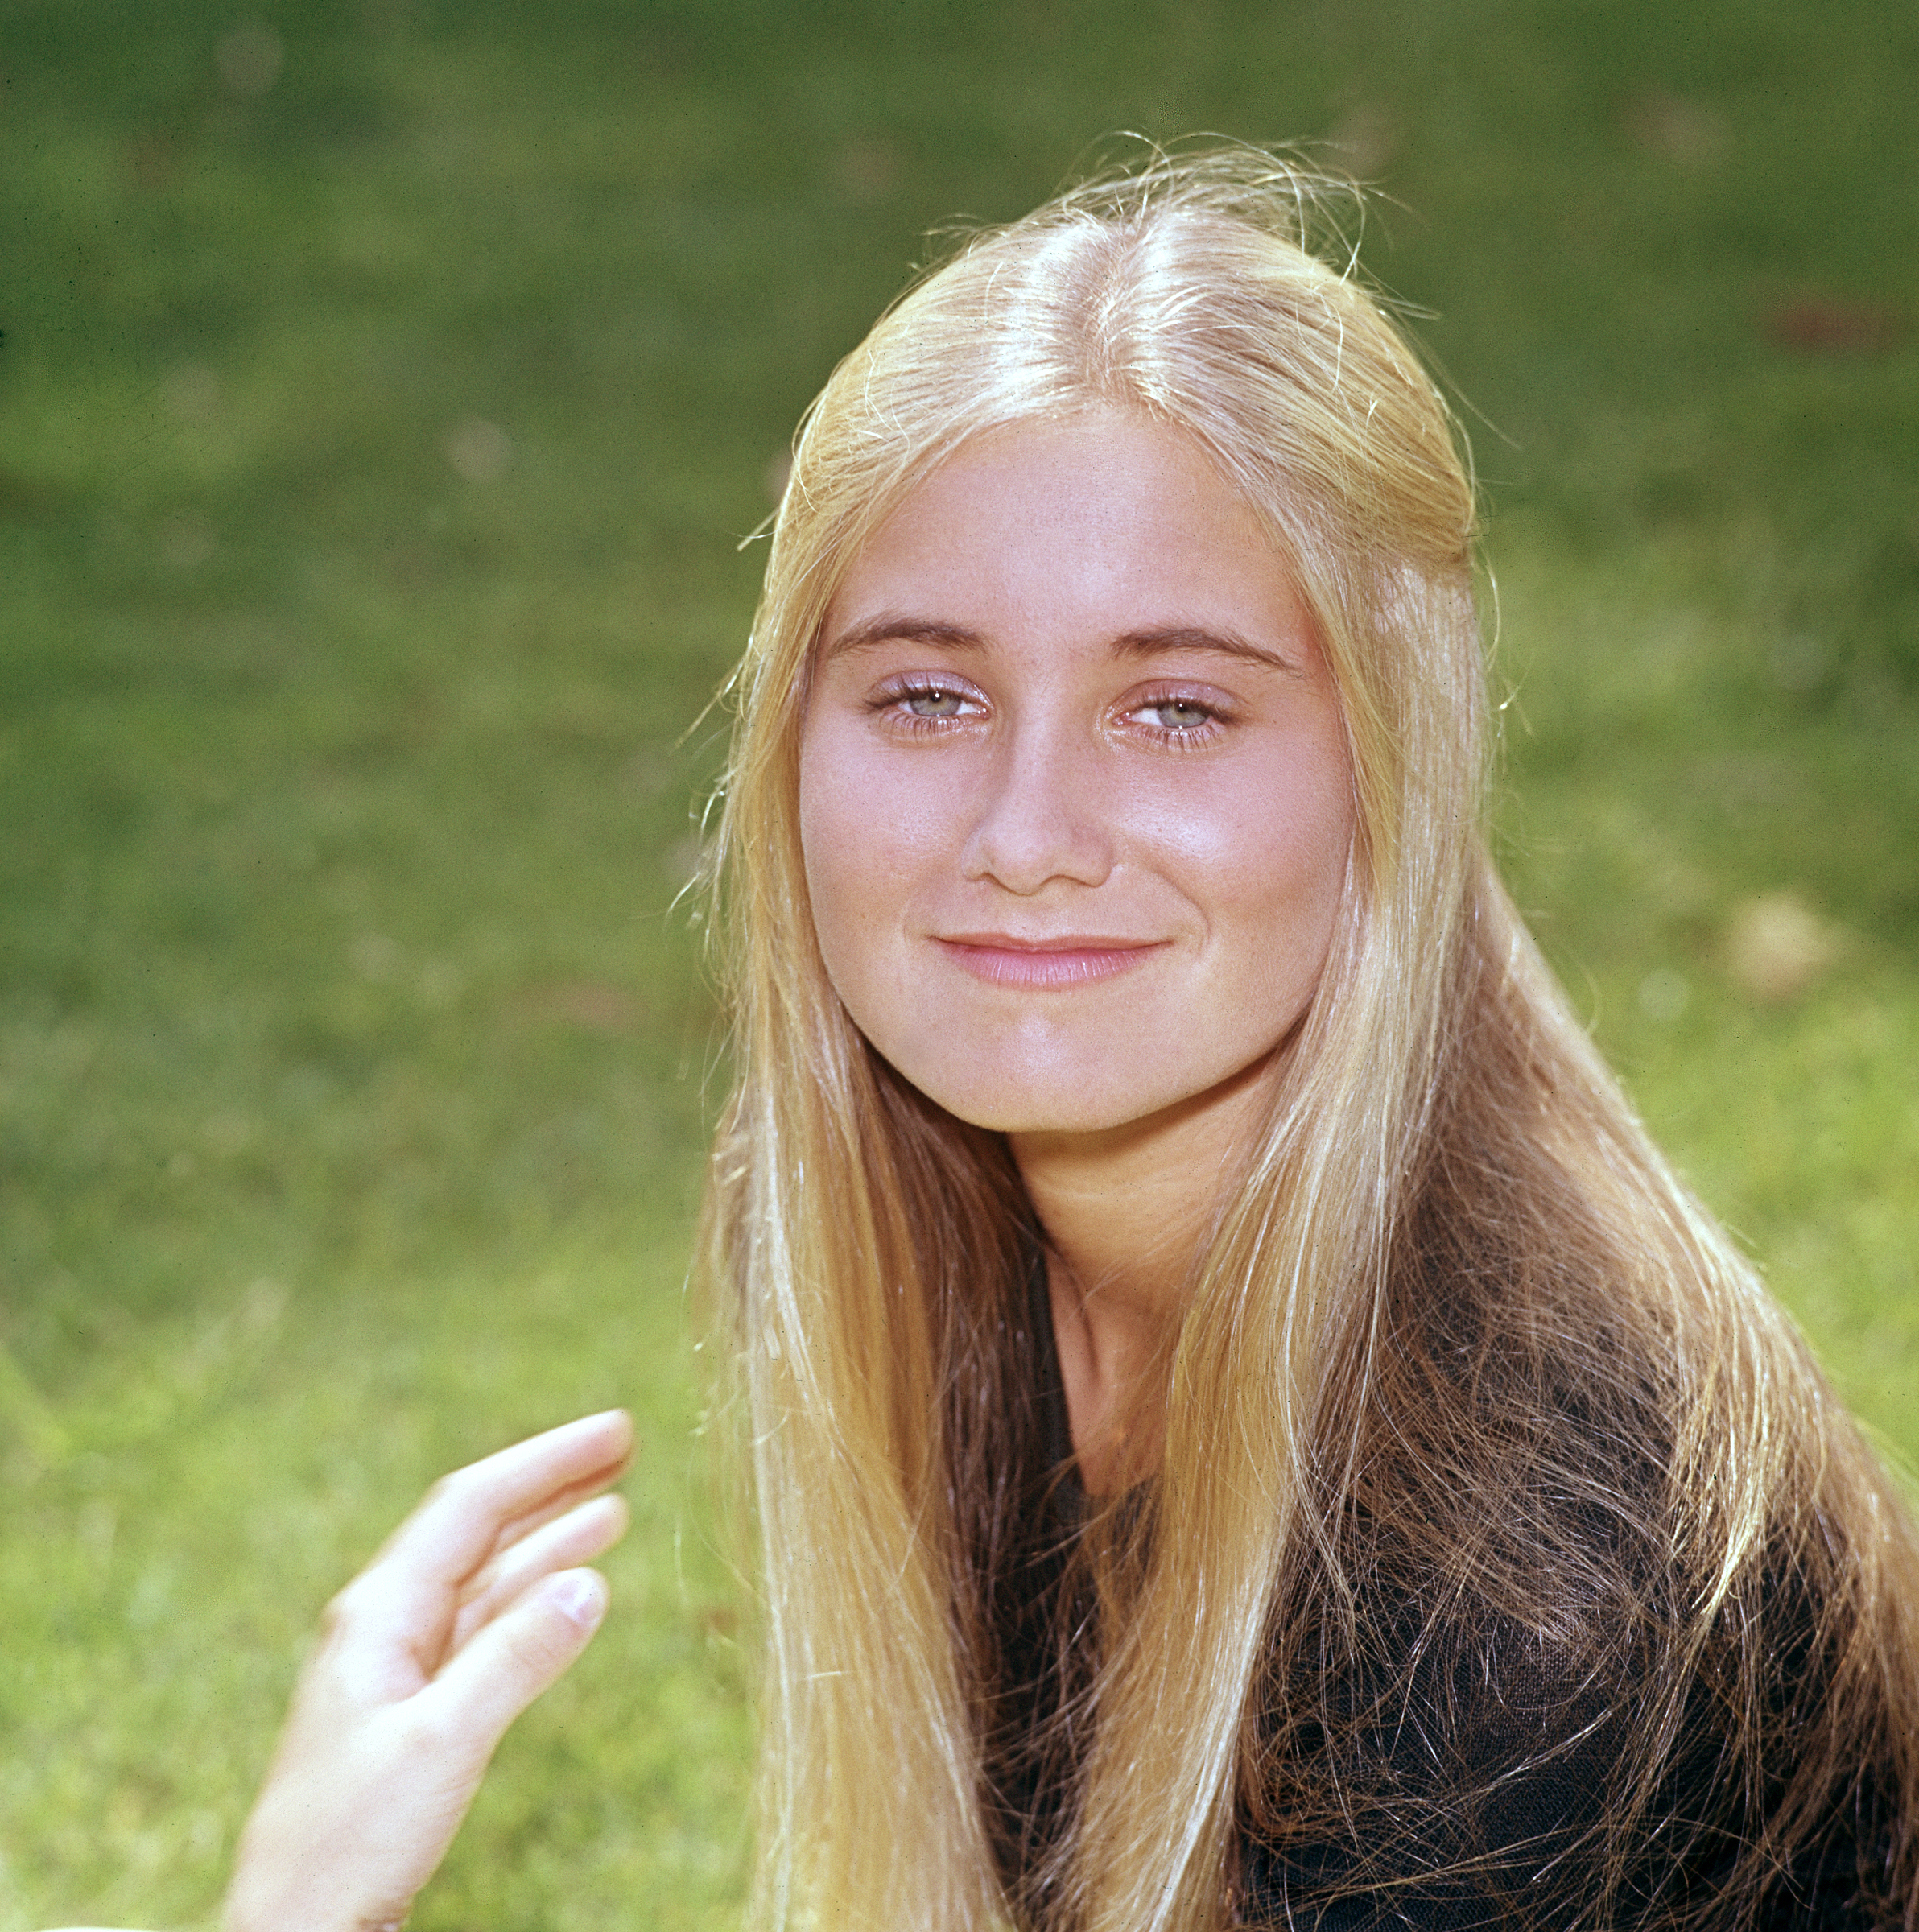 Maureen McCormick captured in a park in 1969 | Source: Getty Images